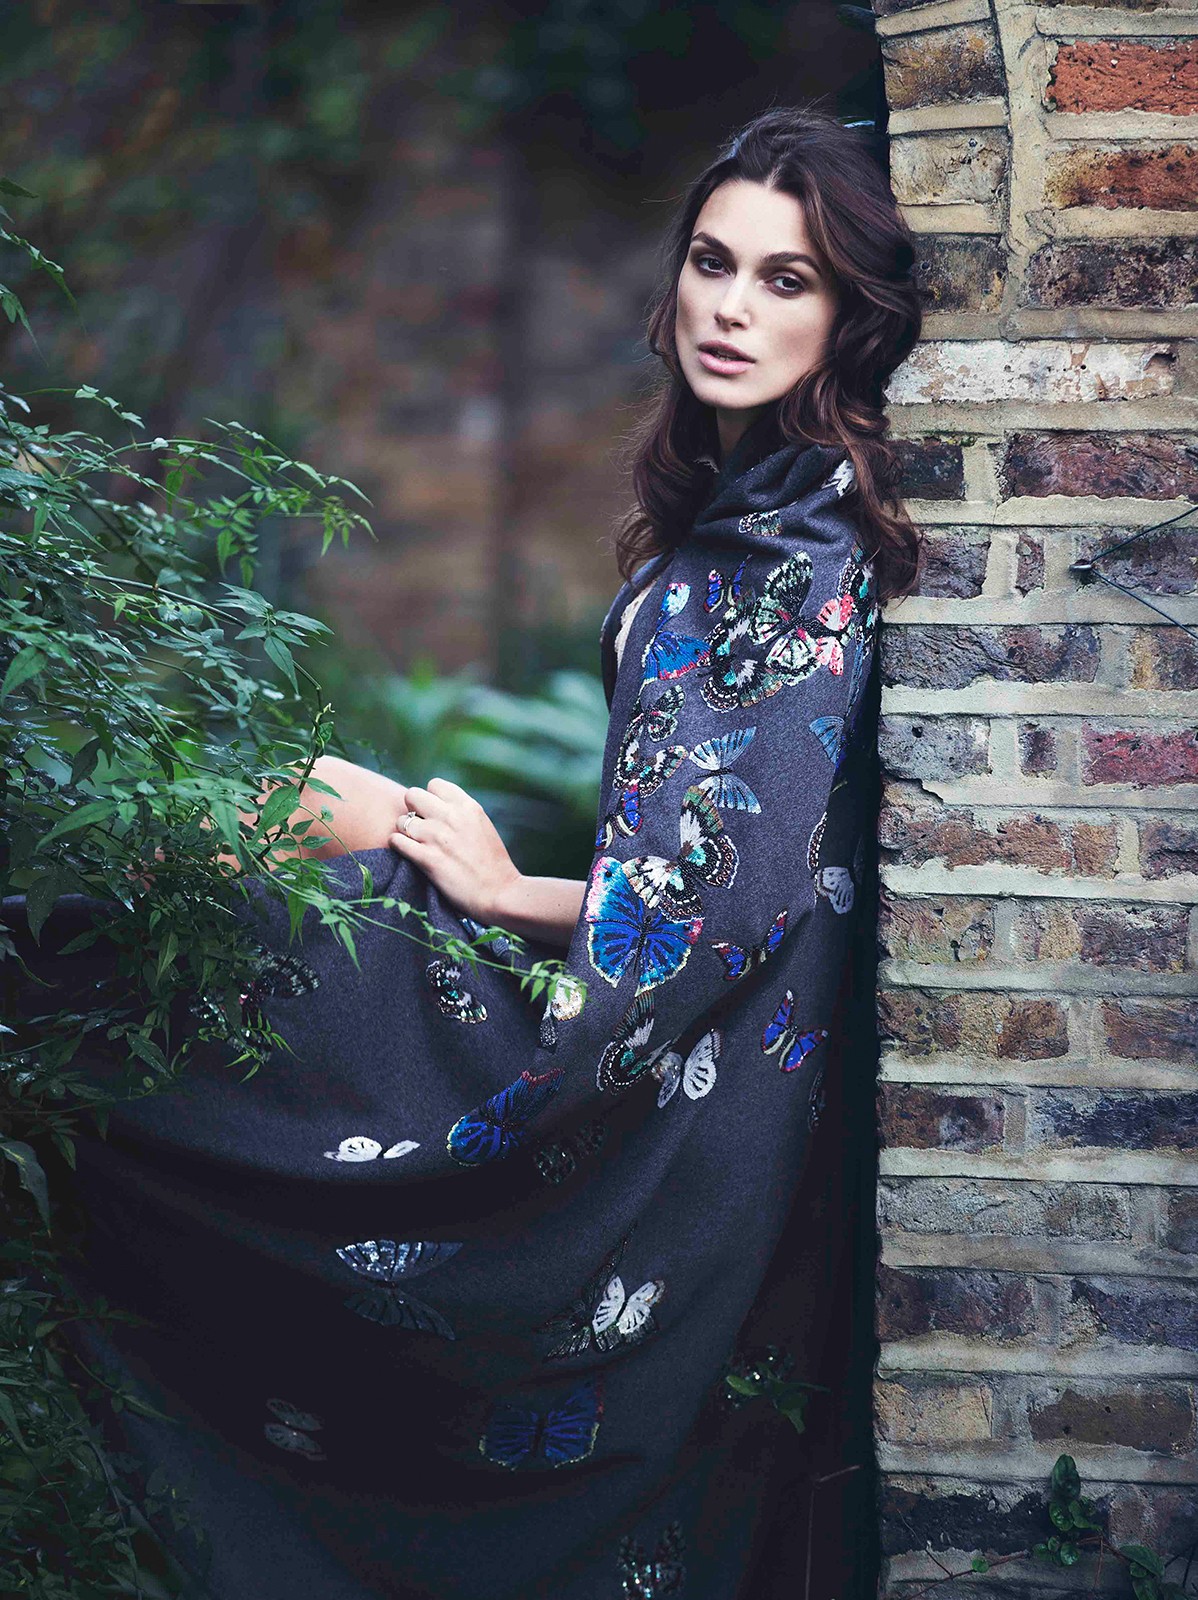 People 1198x1600 Keira Knightley women actress brunette women outdoors robes pale celebrity looking at viewer dark hair outdoors